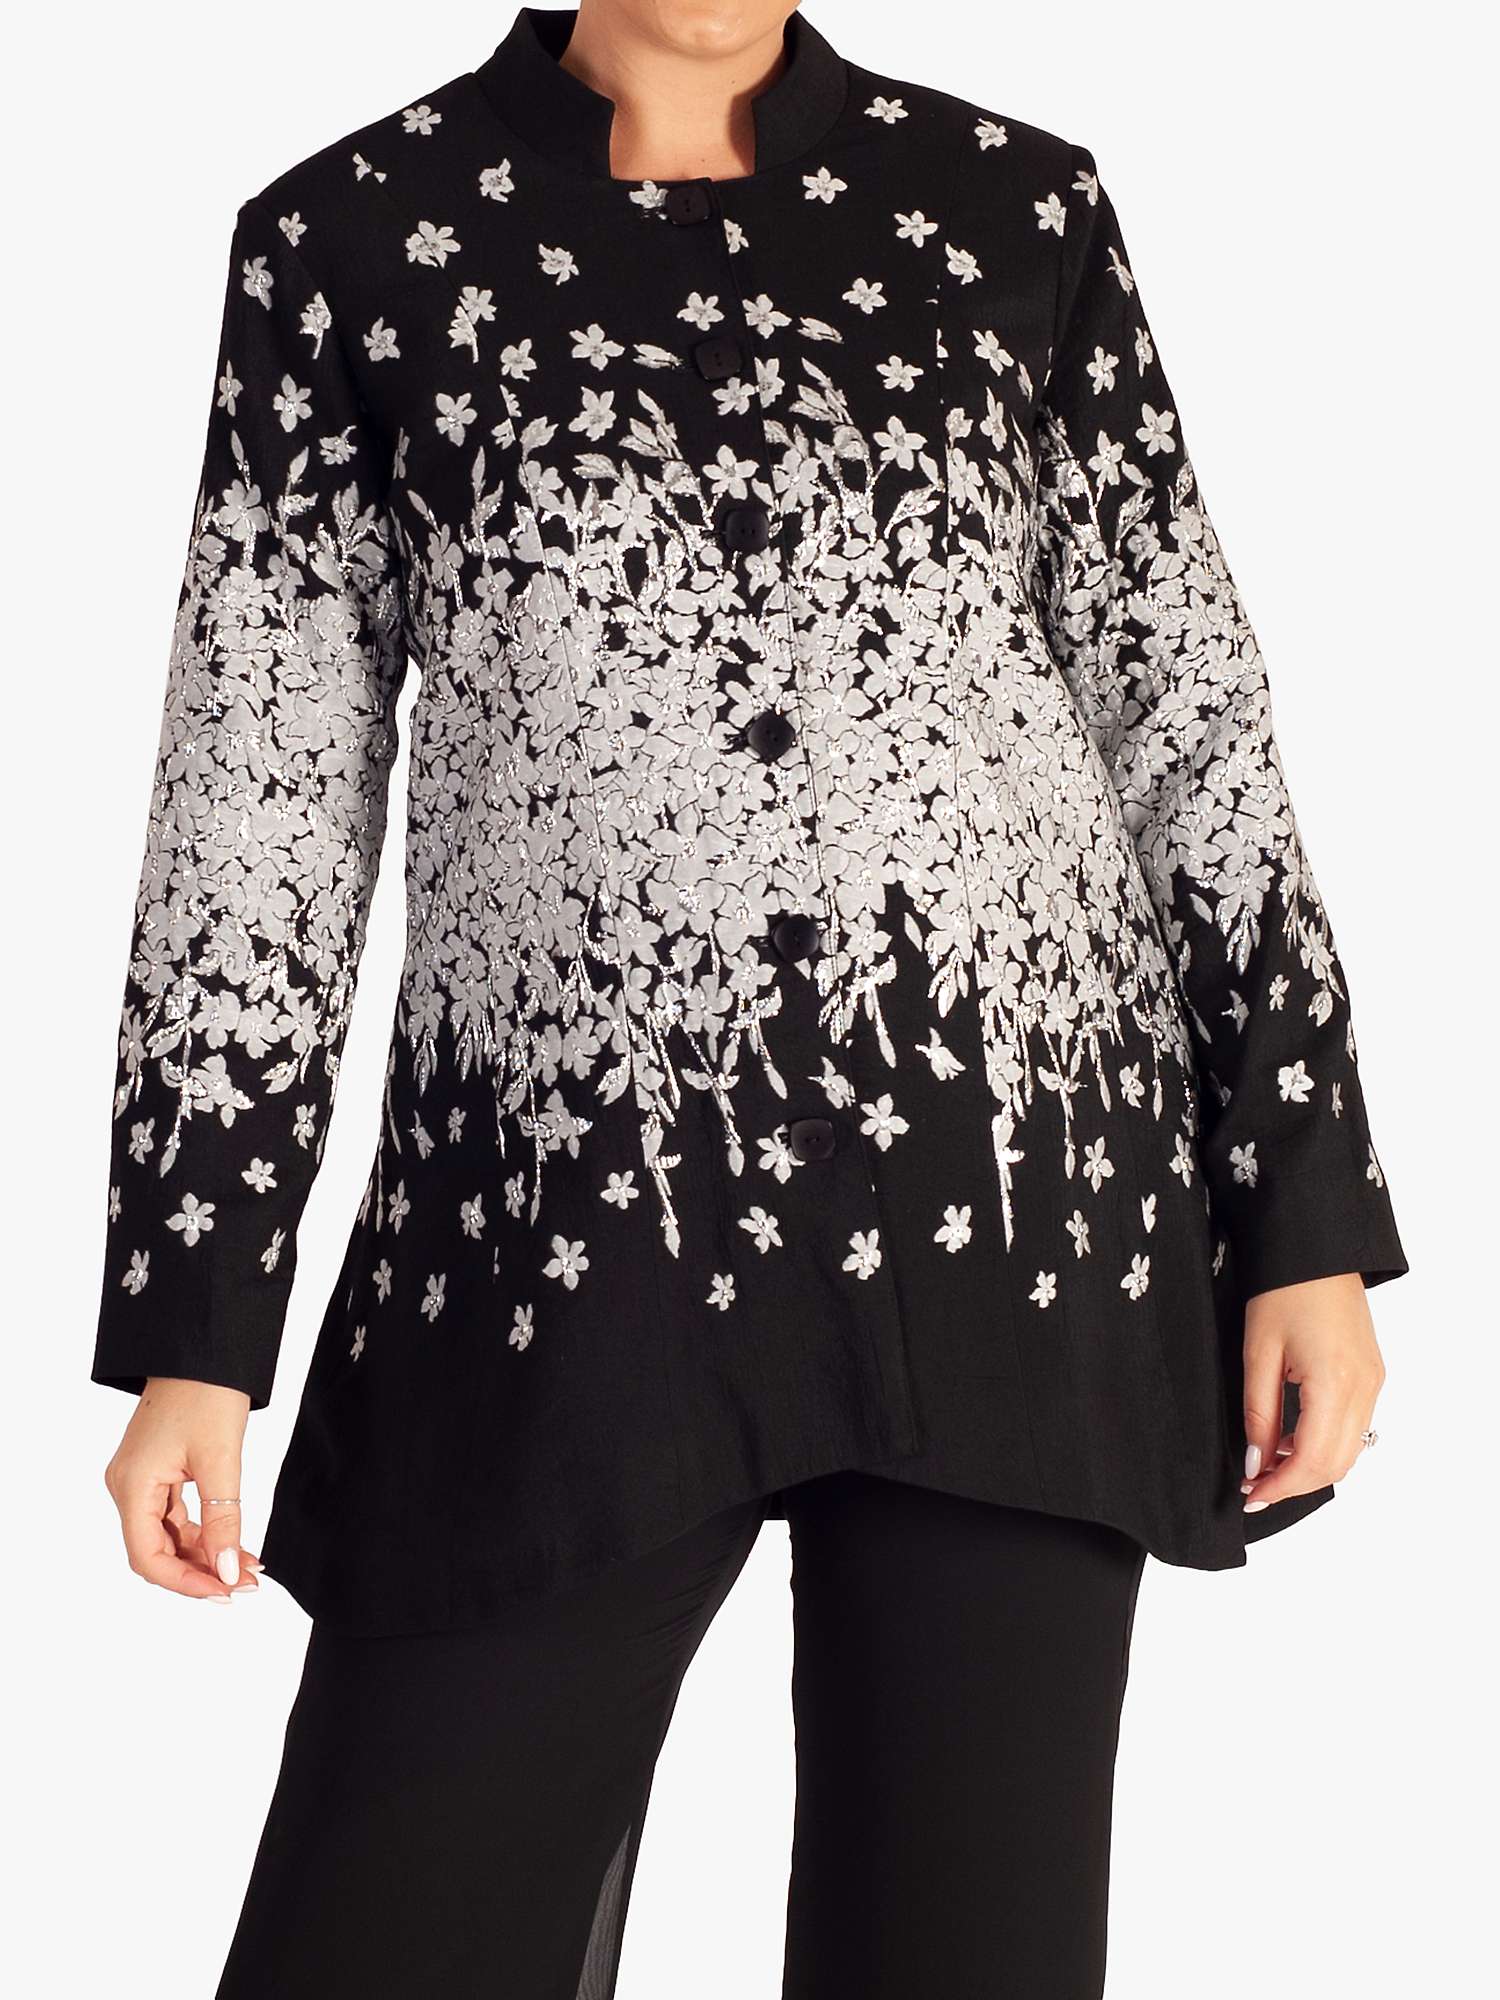 Buy chesca Floral Placement Jacquard Jacket Online at johnlewis.com